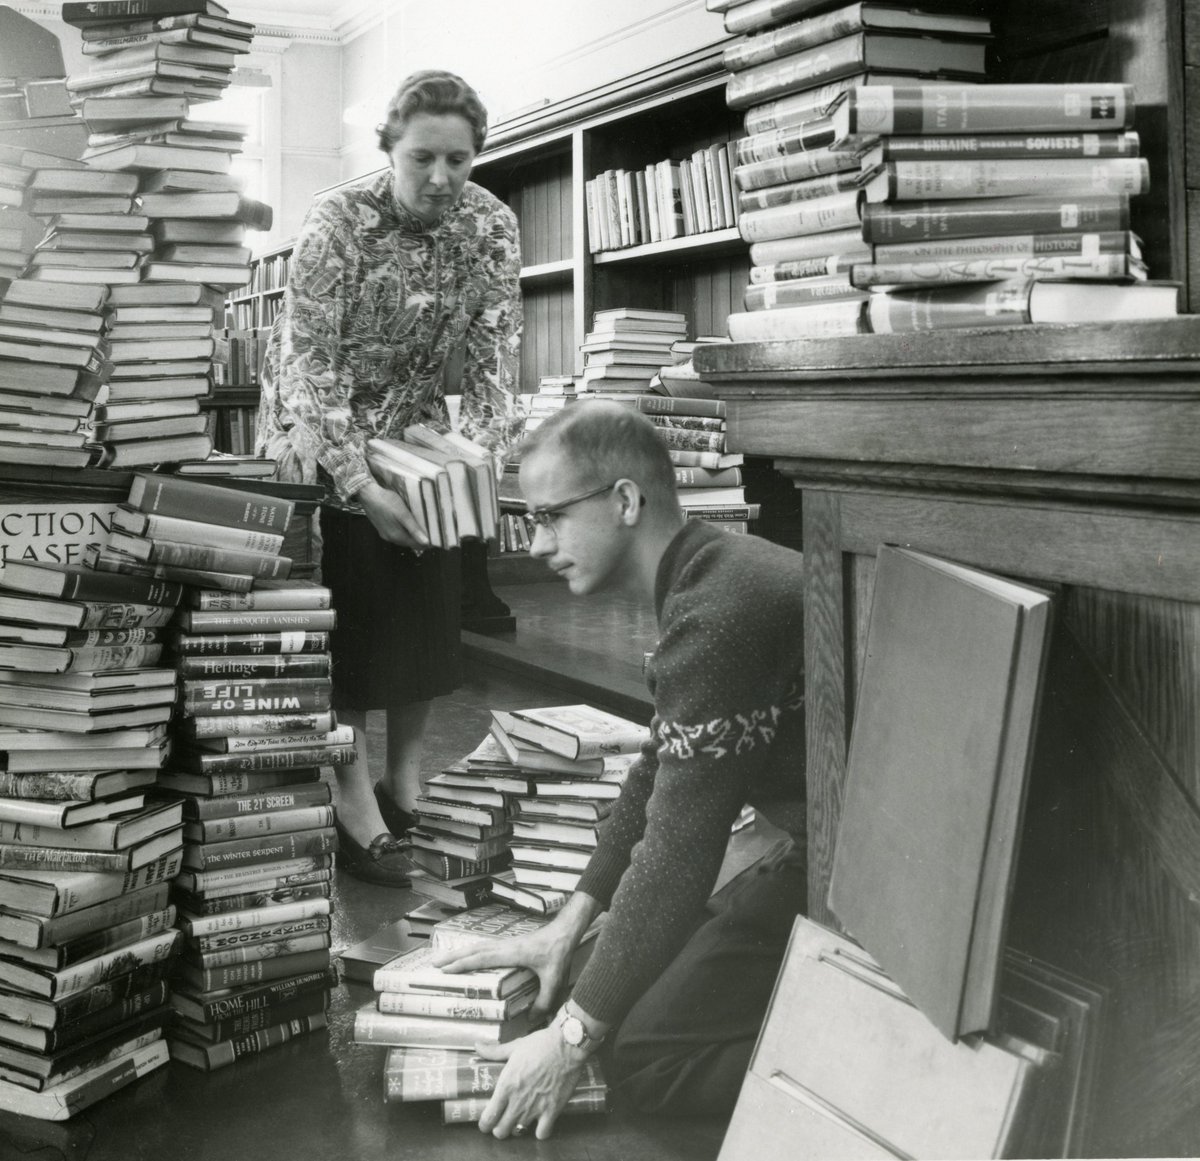 O is for Organize! Get all of those photos, letters, and other family treasures sorted and ready to share! Join Grace Schmidt Room staff this Thursday to learn strategies based in archival science to help you create a personal archive. kpl.events.mylibrary.digital/event?id=73409 #ArchivesAtoZ